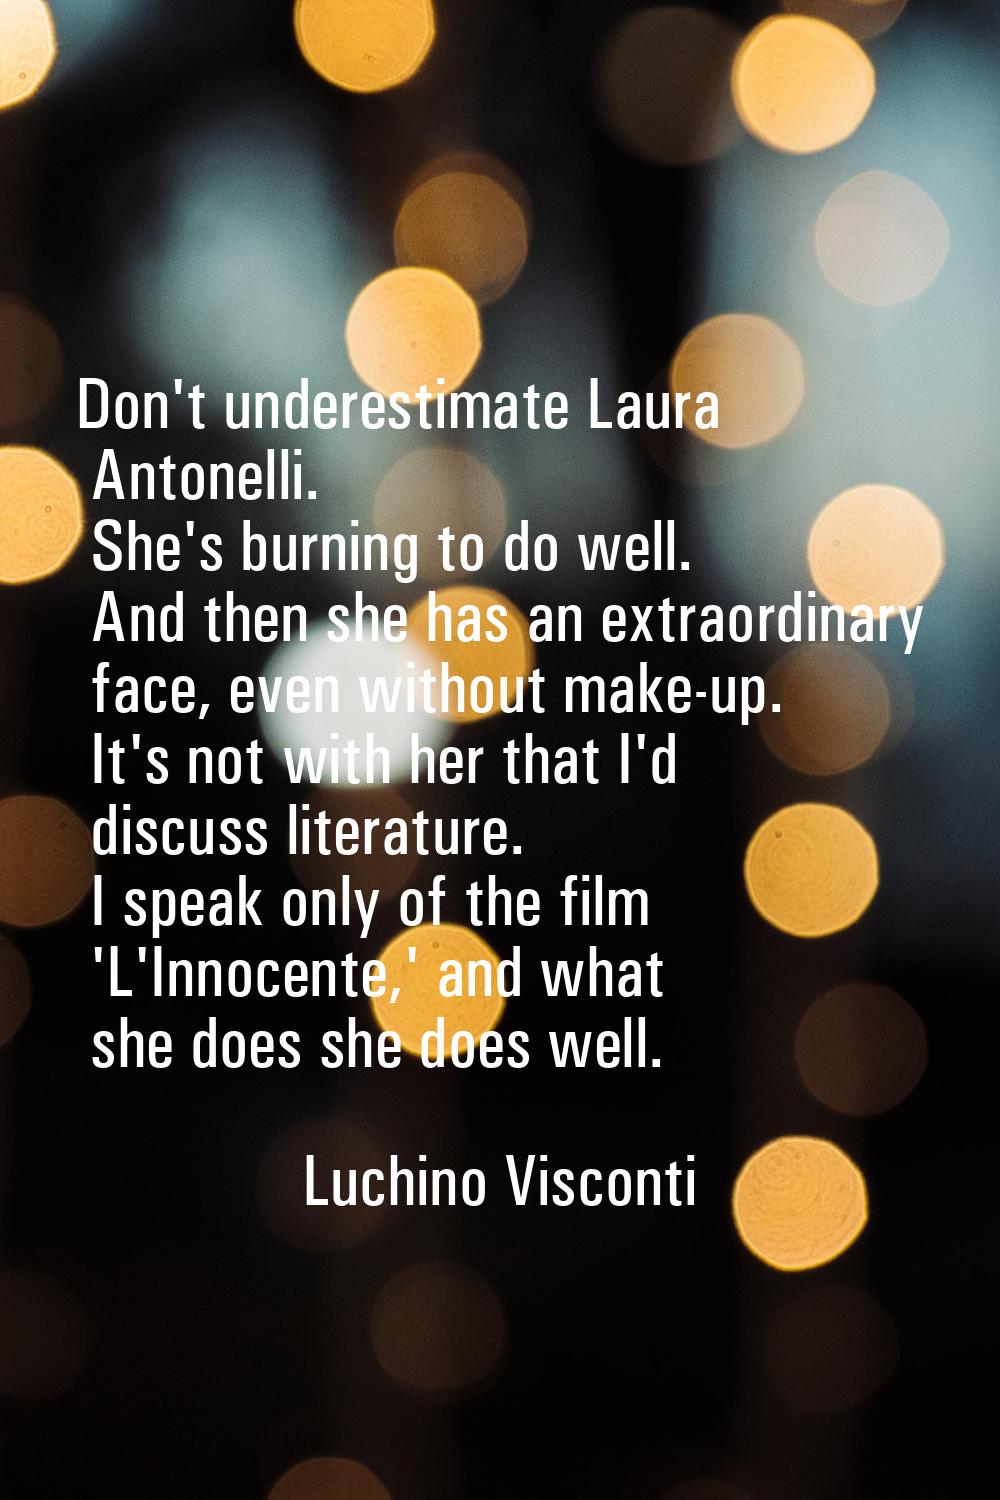 Don't underestimate Laura Antonelli. She's burning to do well. And then she has an extraordinary fa